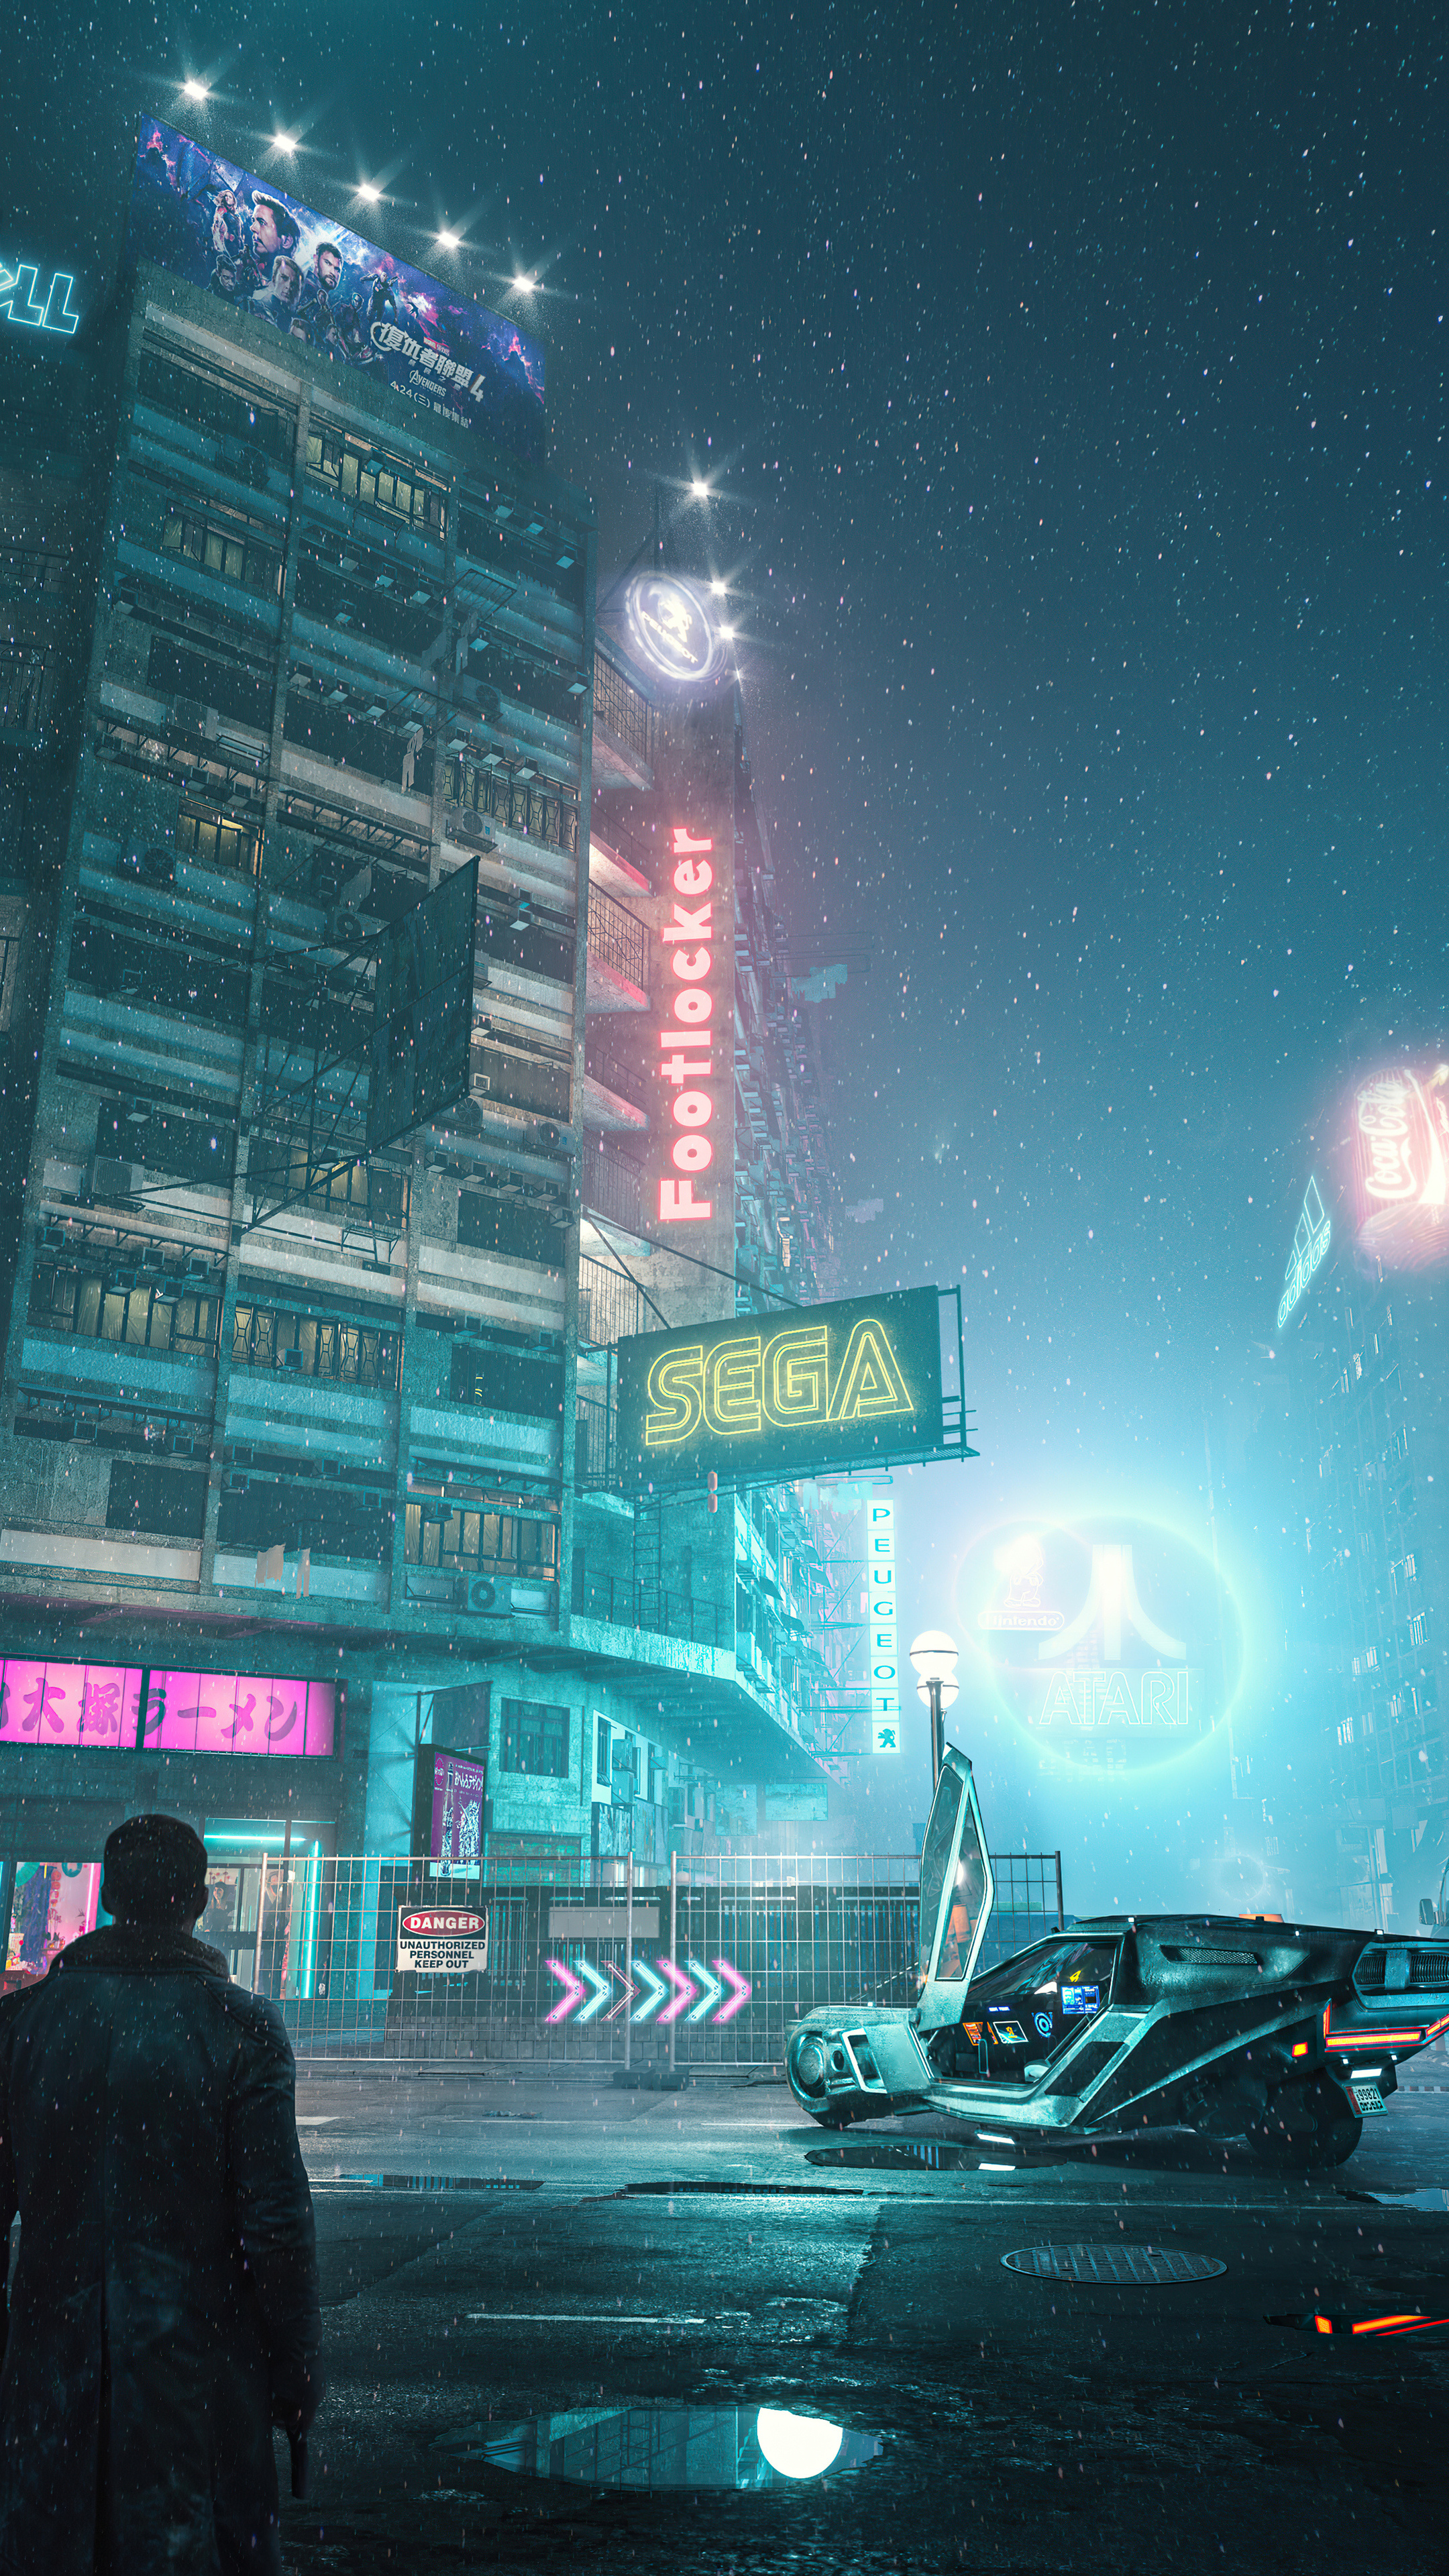 Blade Runner 2049 Tokyo, Cyberpunk cityscape, 4K Sony Xperia wallpapers, HD images, 2160x3840 4K Handy